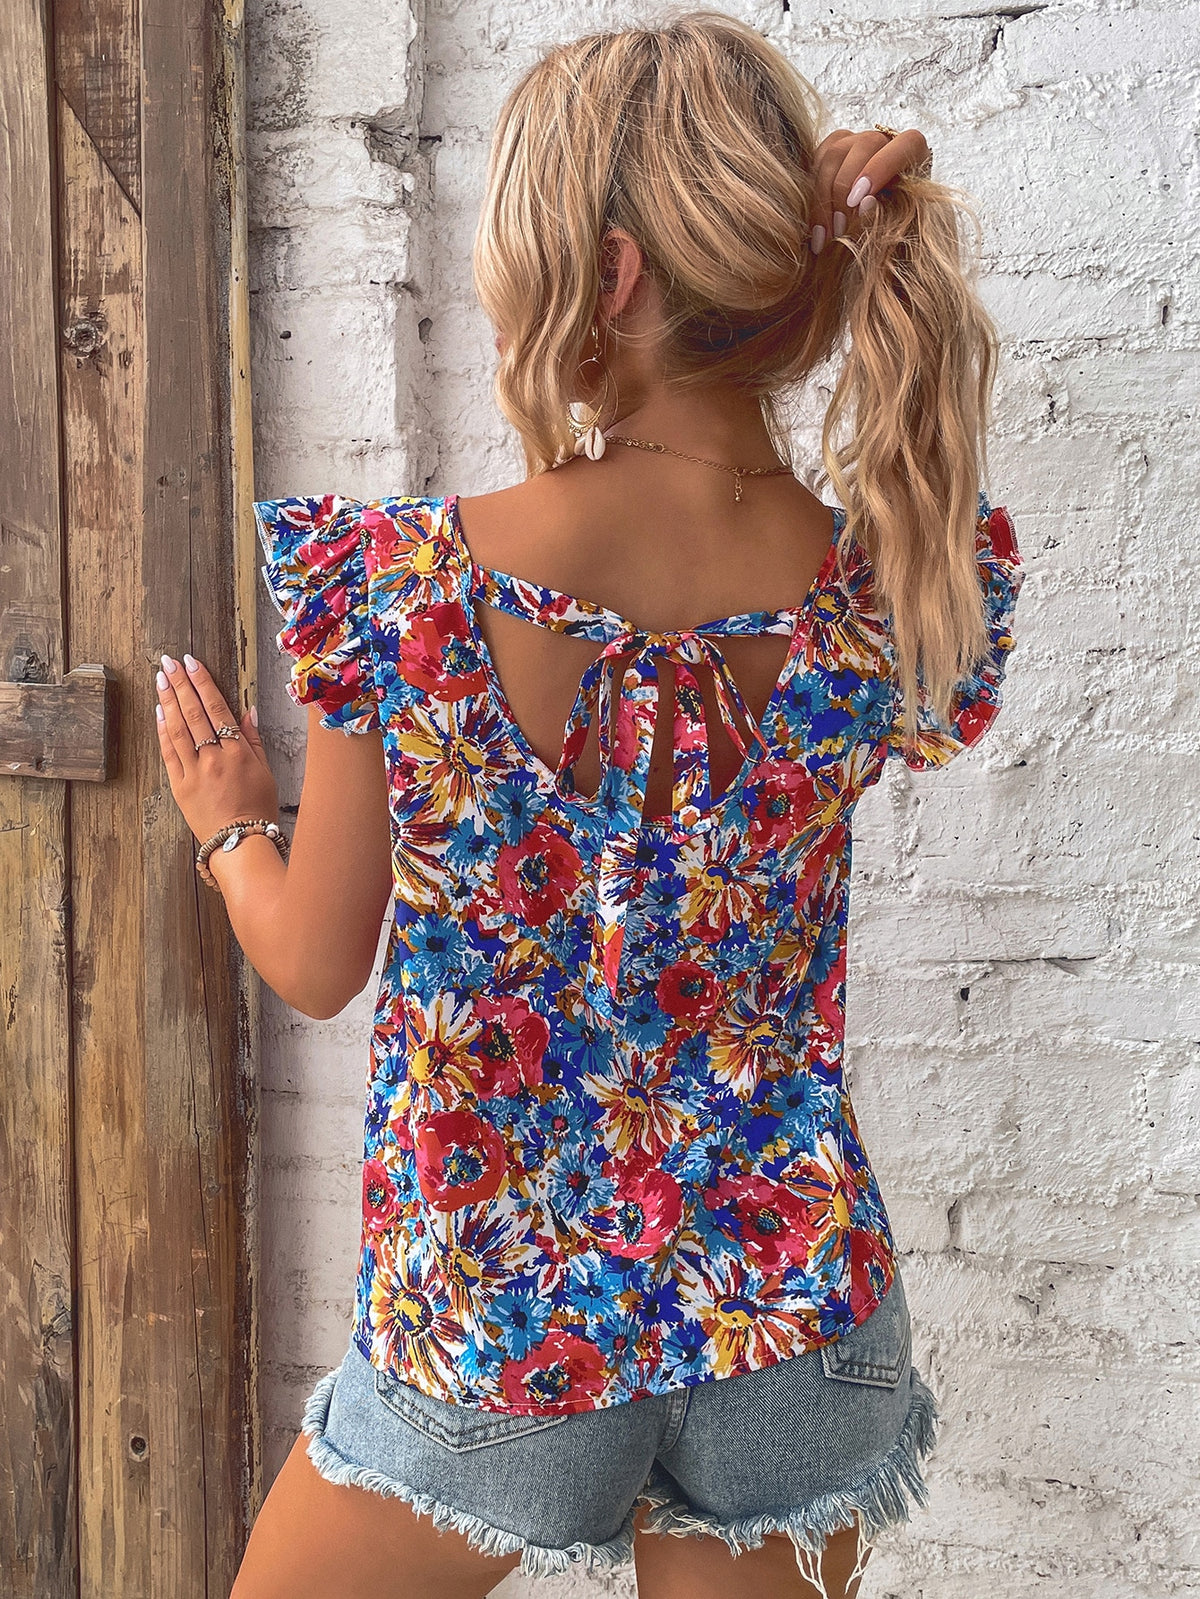 Large Florals Print Blouse with Ruffle Trim - 